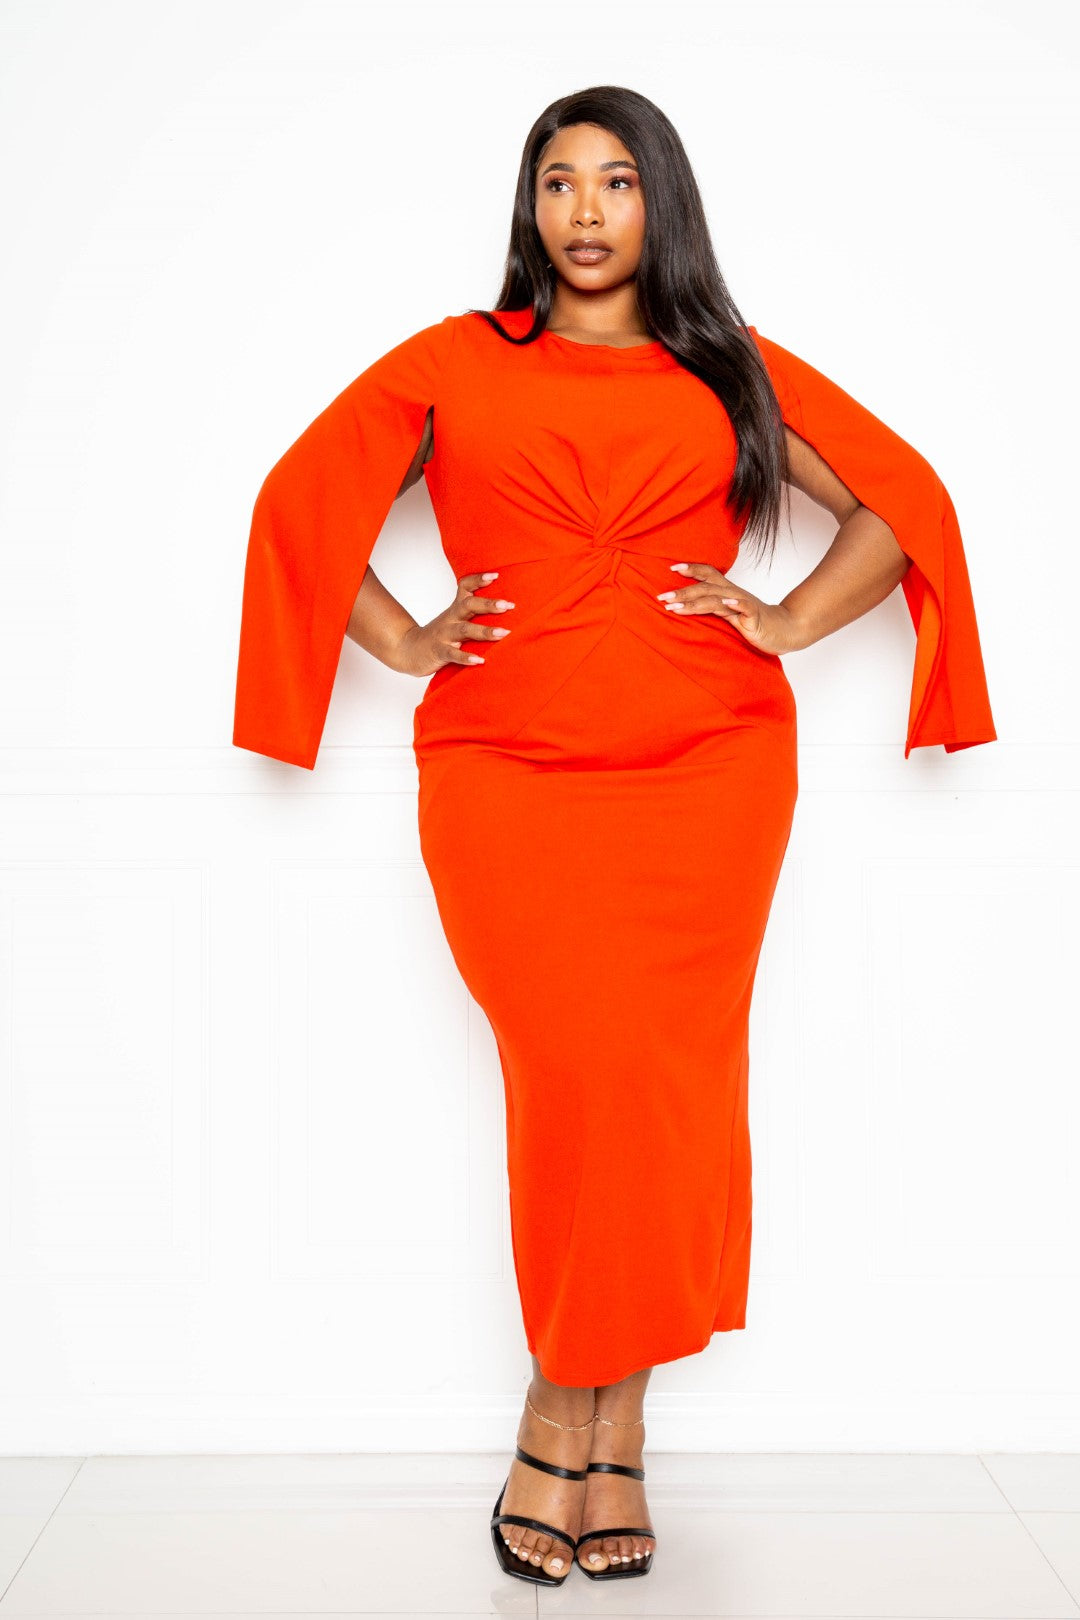 Plus Size Cape Sleeve Dress CCPRODUCTS, NEW ARRIVALS, PLUS SIZE, PLUS SIZE DRESSES Style Your Curves